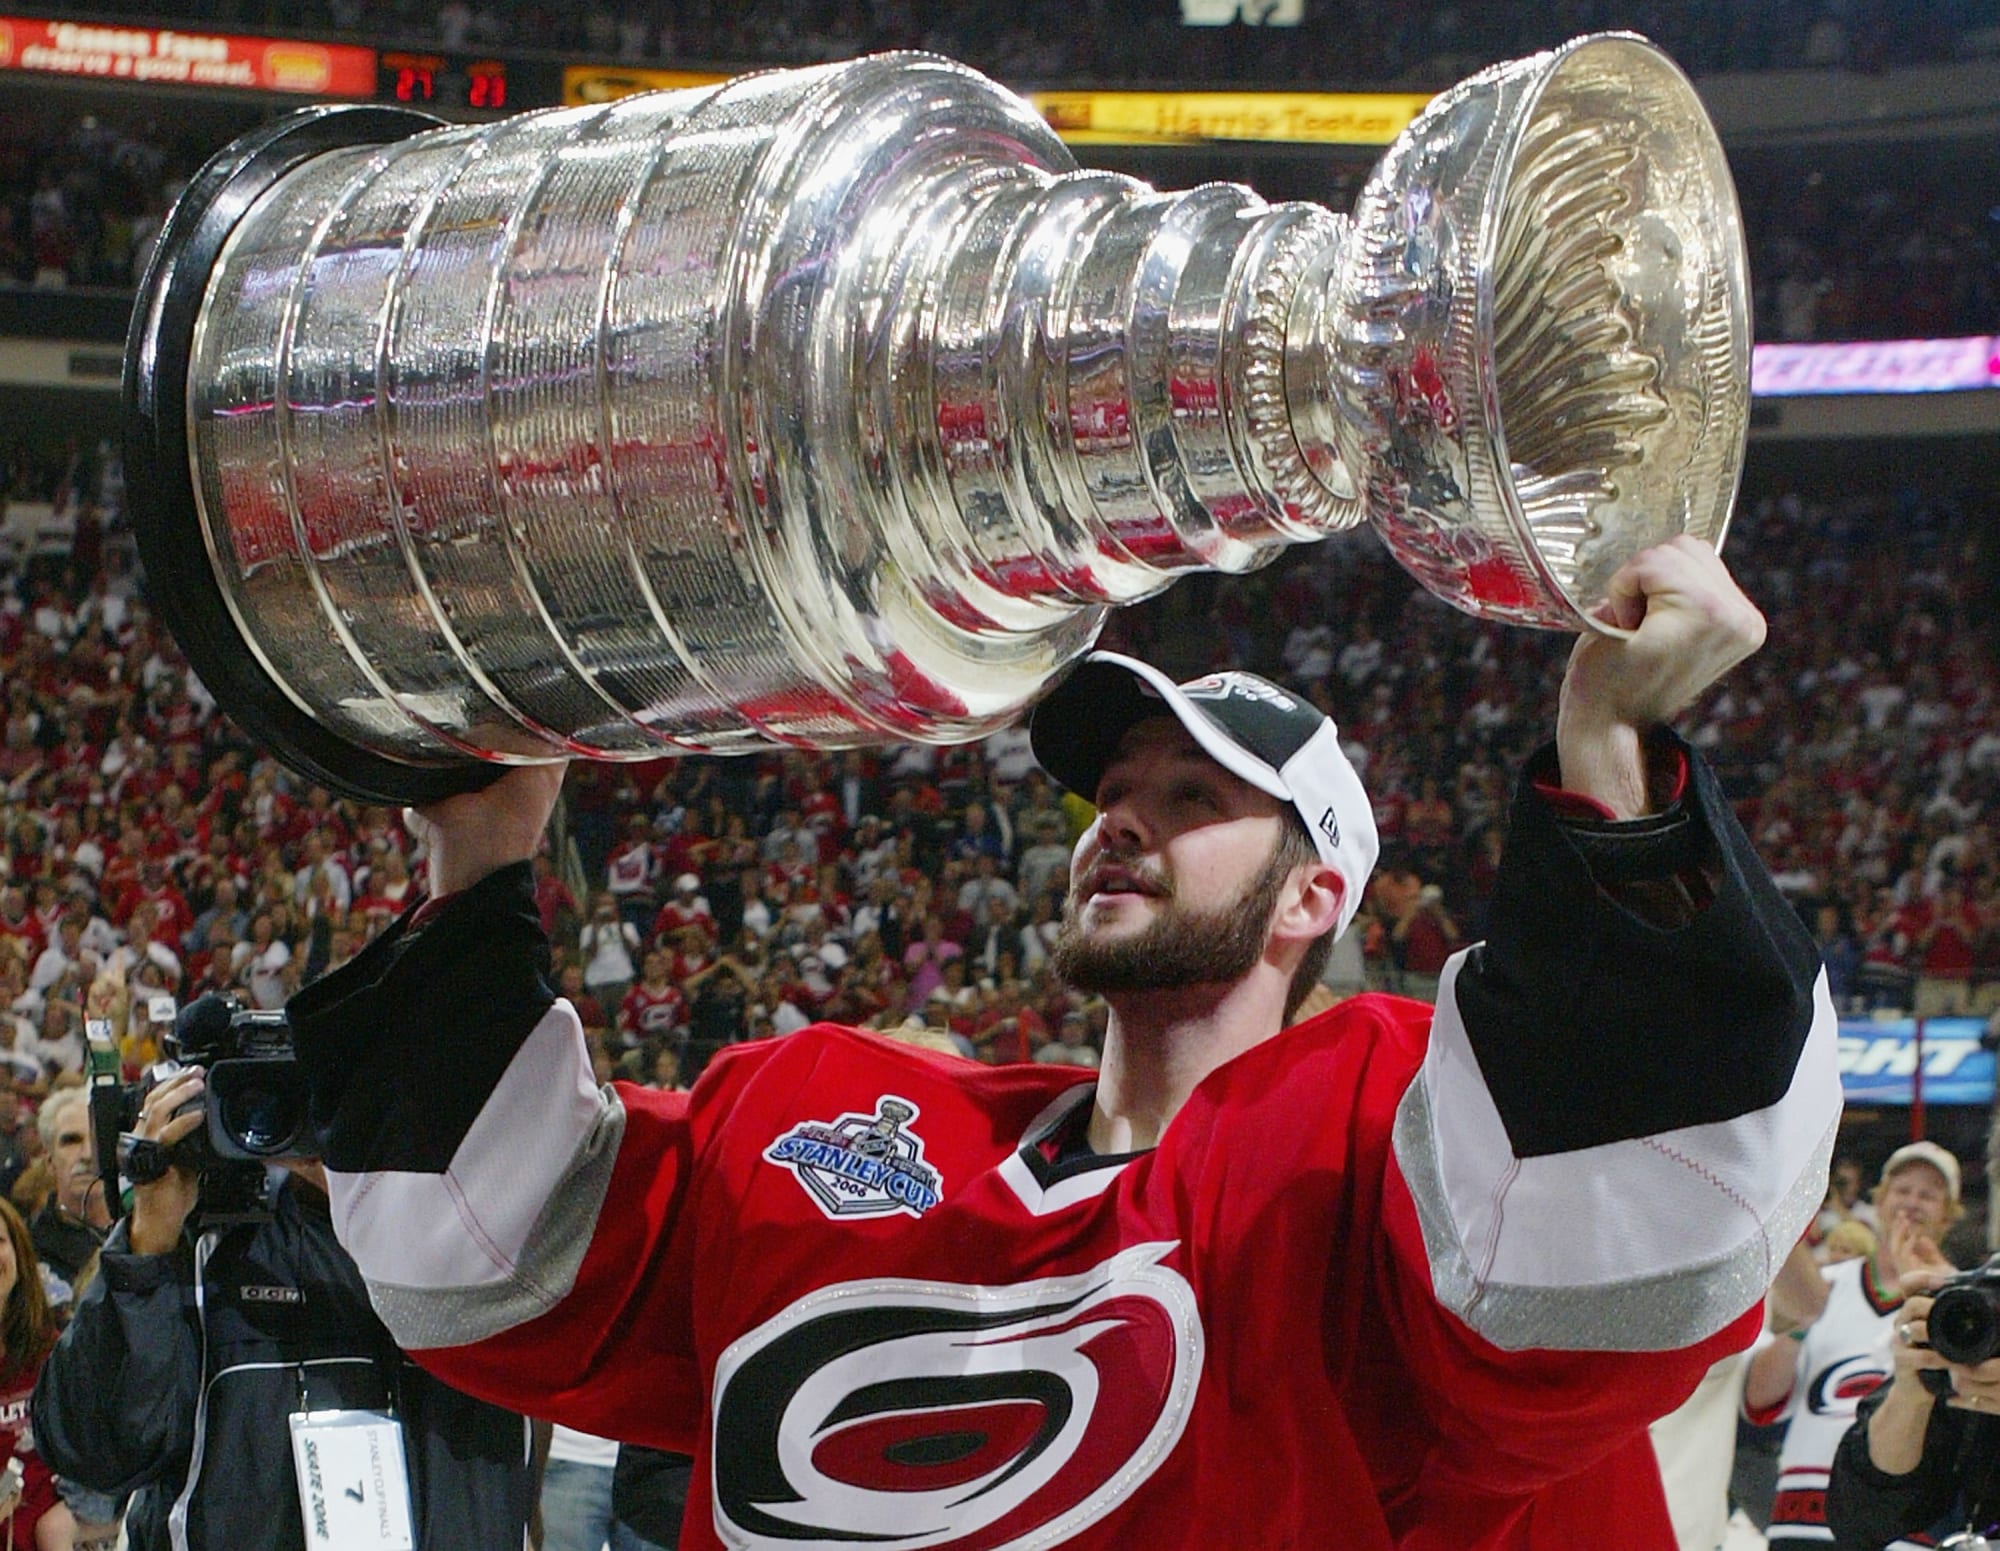 Carolina Hurricanes Fan Favorites: Arturs Irbe and those white pads - Page 5